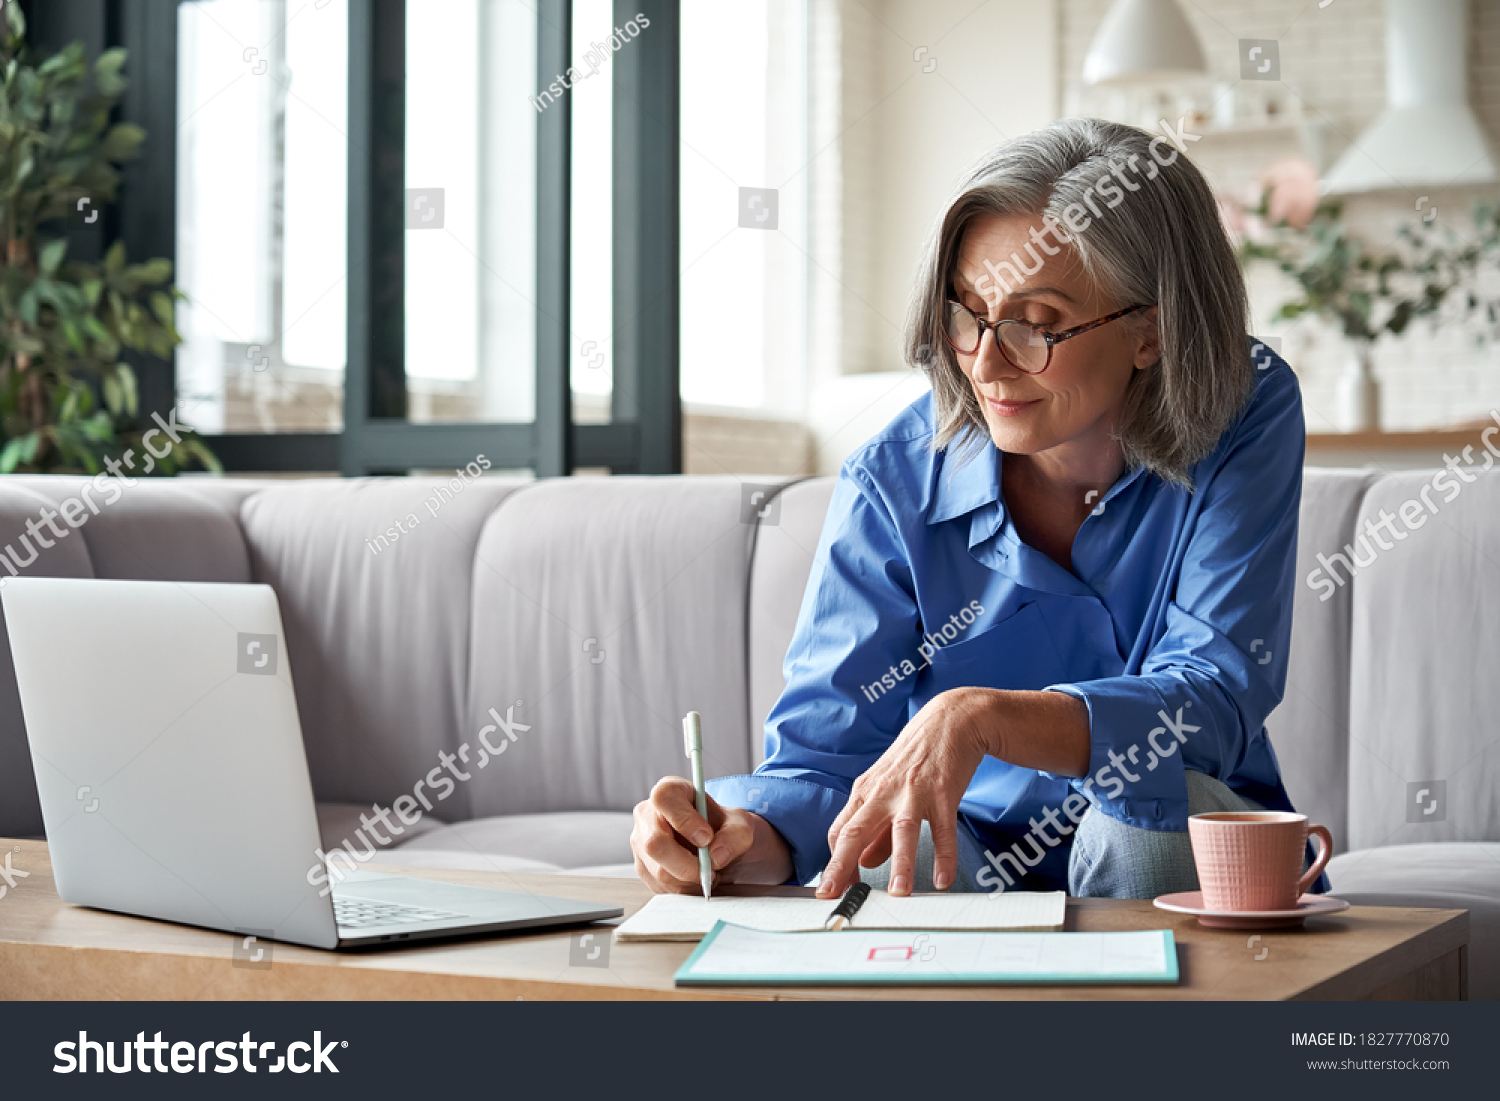 Happy stylish mature old woman remote working from home distance office on laptop taking notes. Smiling 60s middle aged business lady using computer watching webinar sit on couch writing in notebook. #1827770870